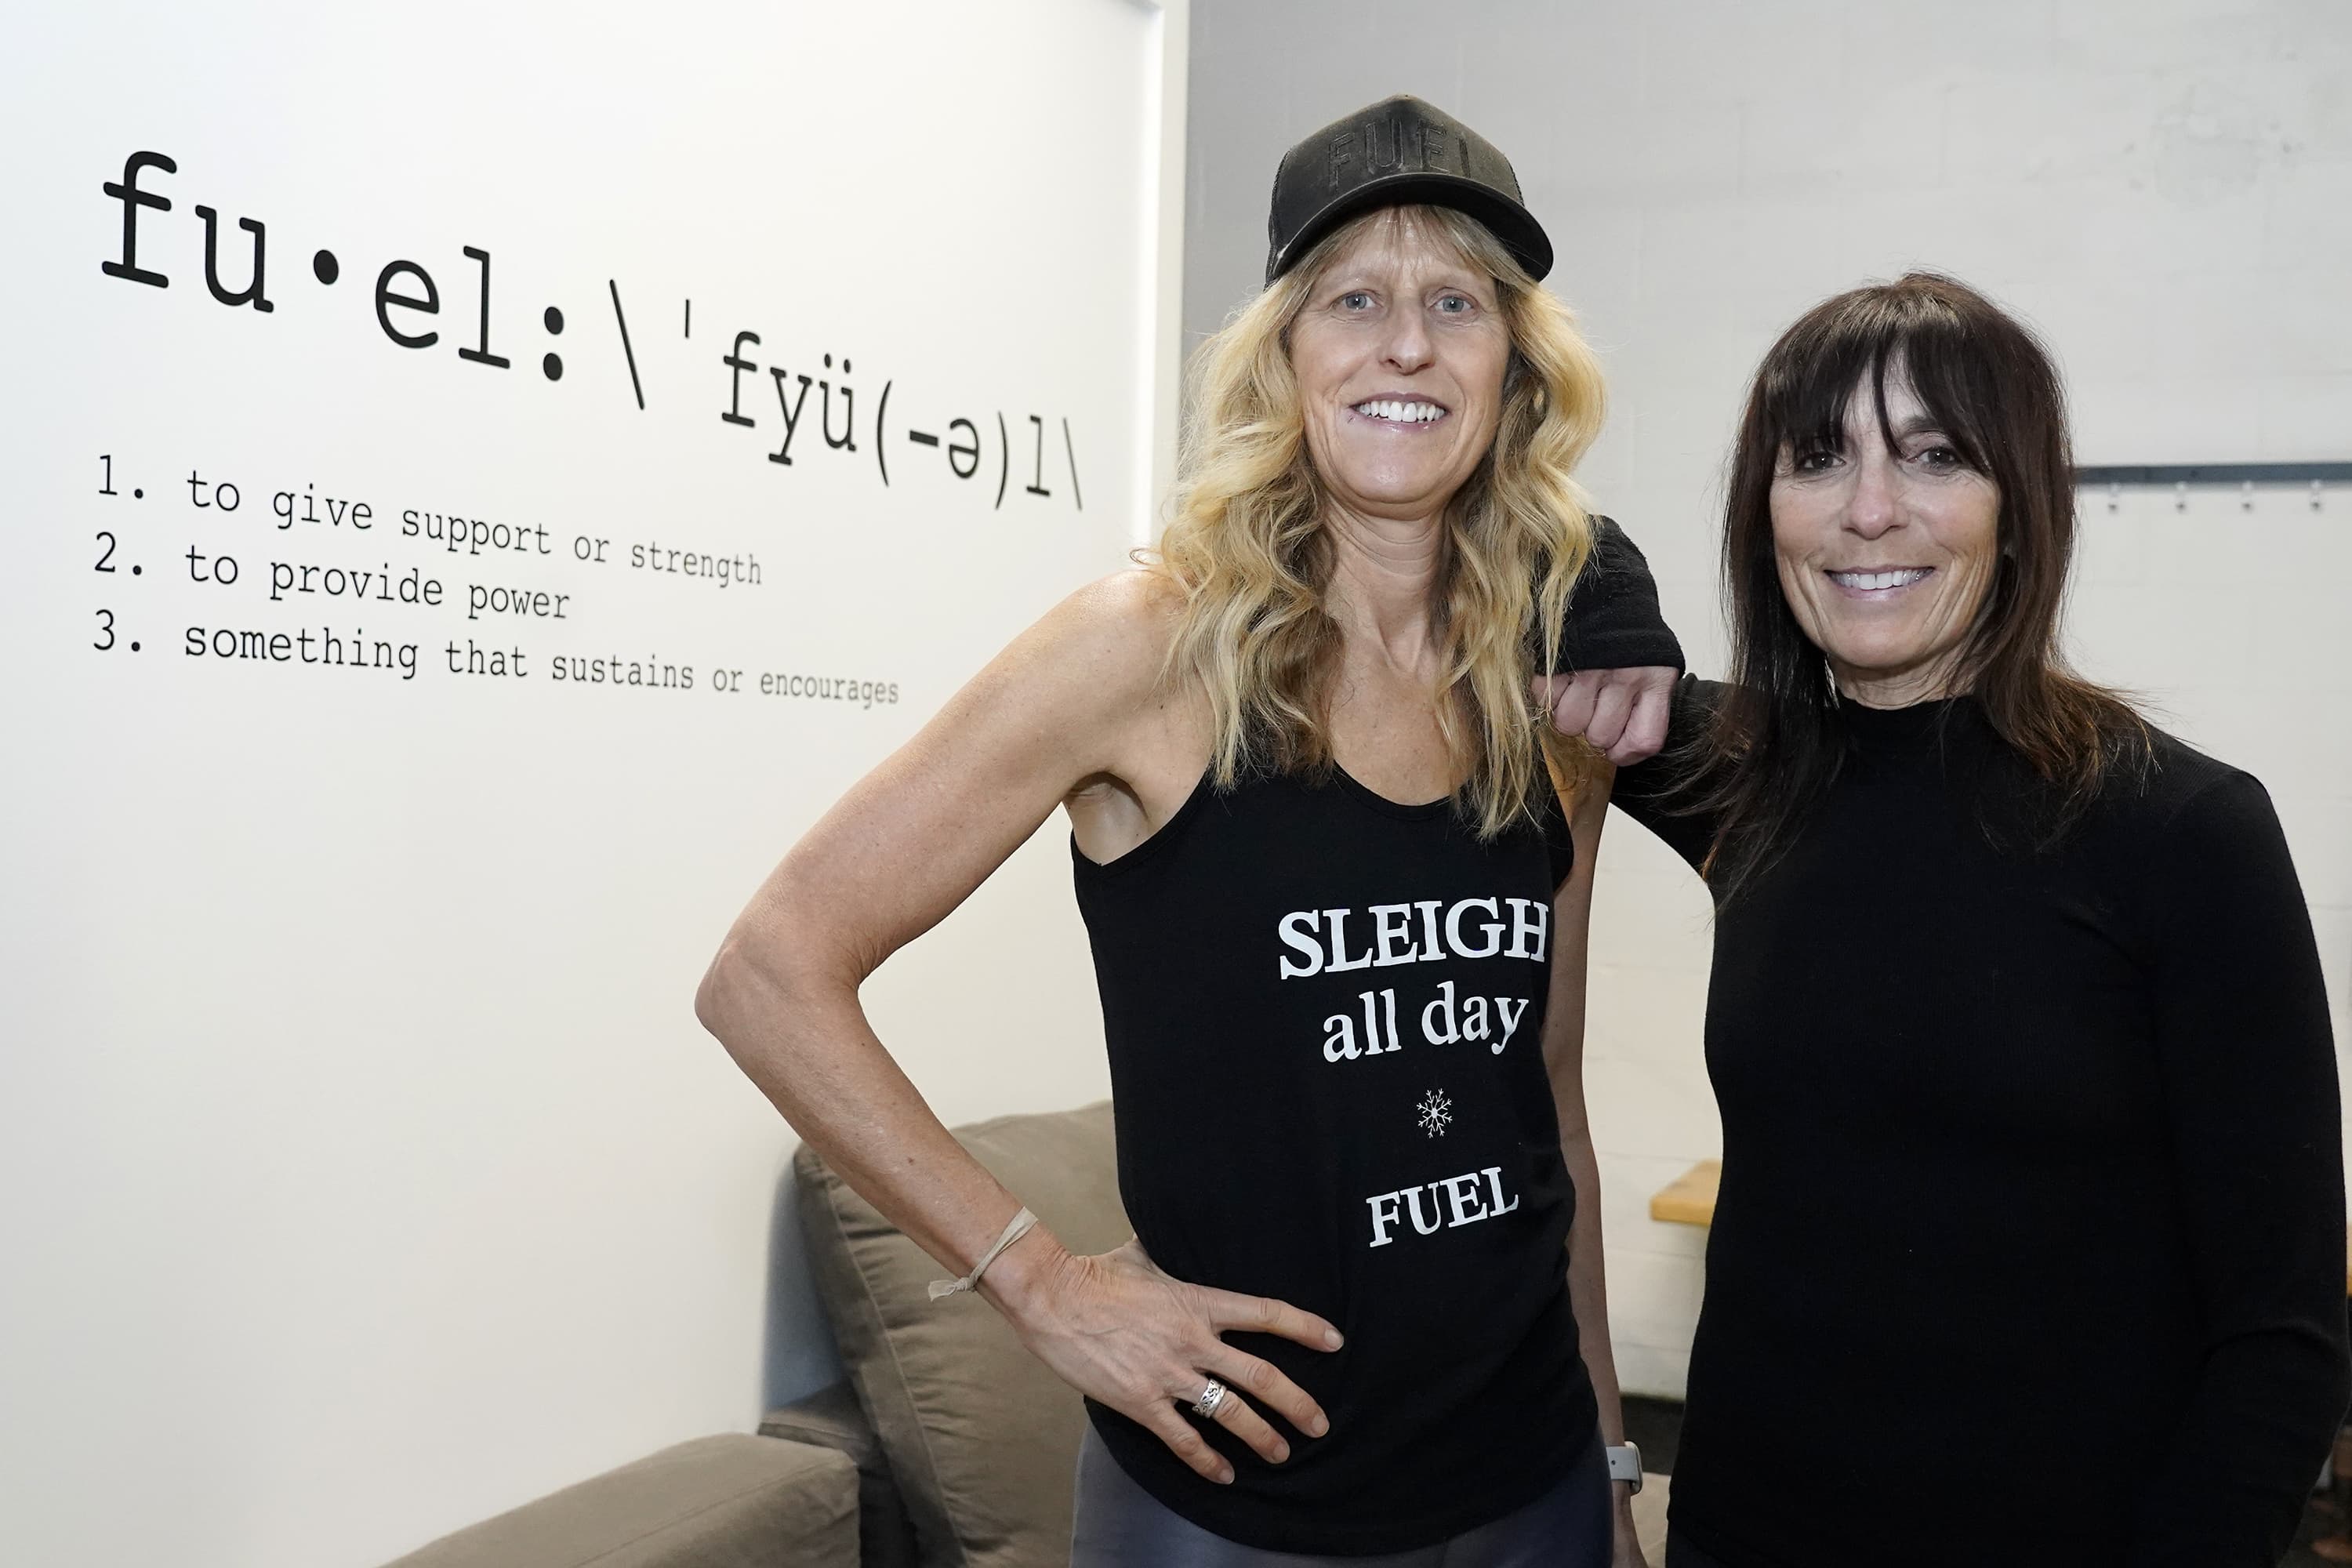 Fuel Training Studio owners Julie Bokat, left, and Jeanne Carter pose for a photo inside their gym, Thursday, Jan. 19, 2023, in Newburyport, Mass. (Mary Schwalm/AP)